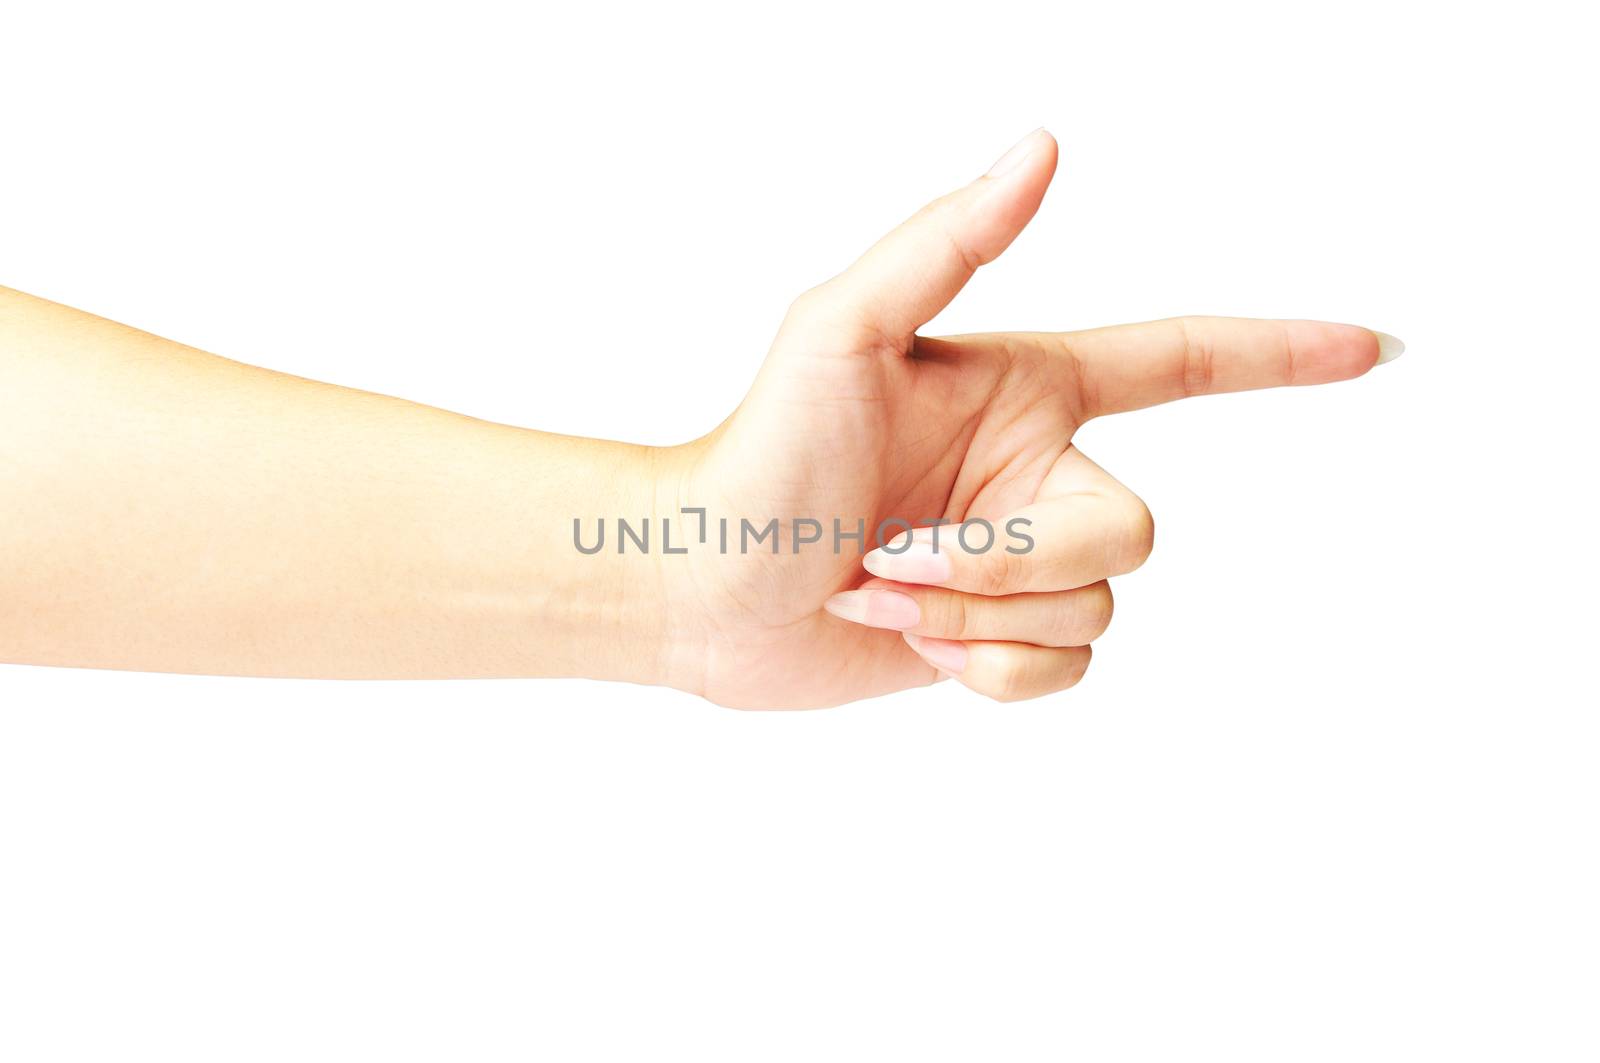 Female hand on white background pointing on touch screen